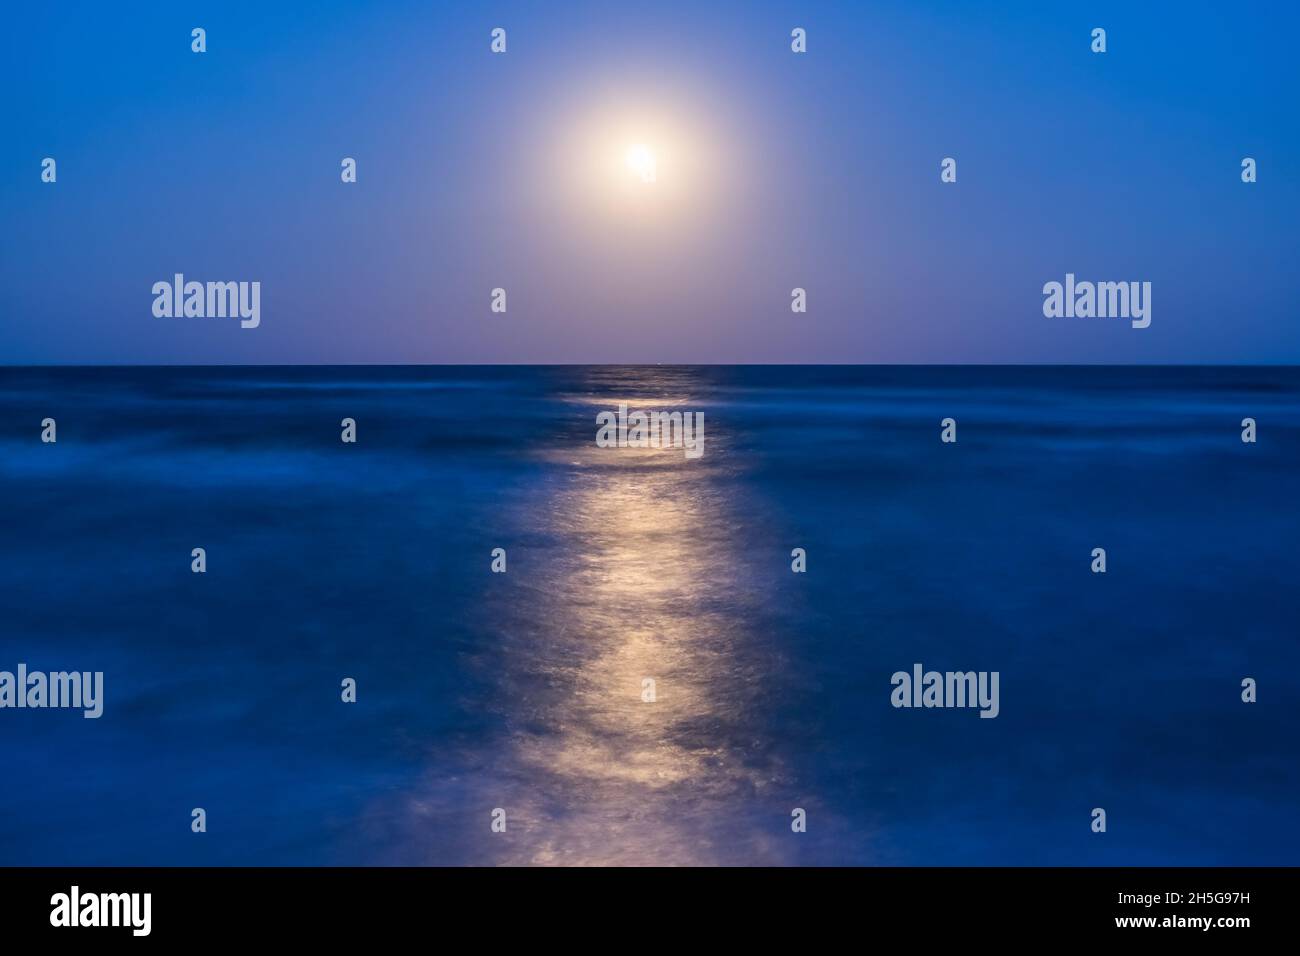 Night landscape with full moon and lunar path on sea, long exposure Stock Photo